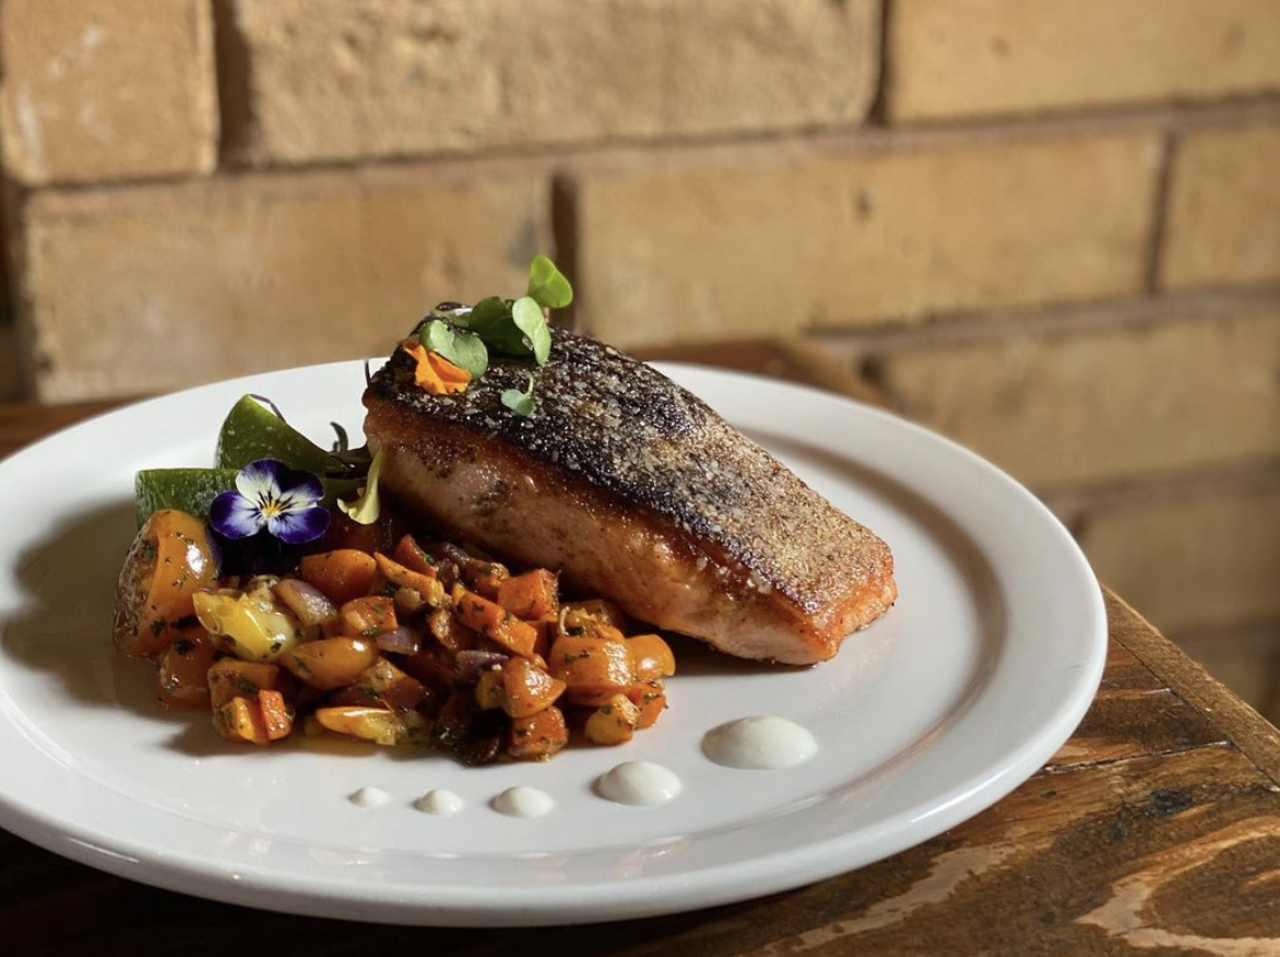 Cured
306 Pearl Pkwy #101, (210) 314-3929, curedatpearl.com
Indulge in a pan seared king salmon filet and butternut squash hash at this Pearl-area eatery for a Lenten-approved meal. 
Photo via Instagram / curedatpearl